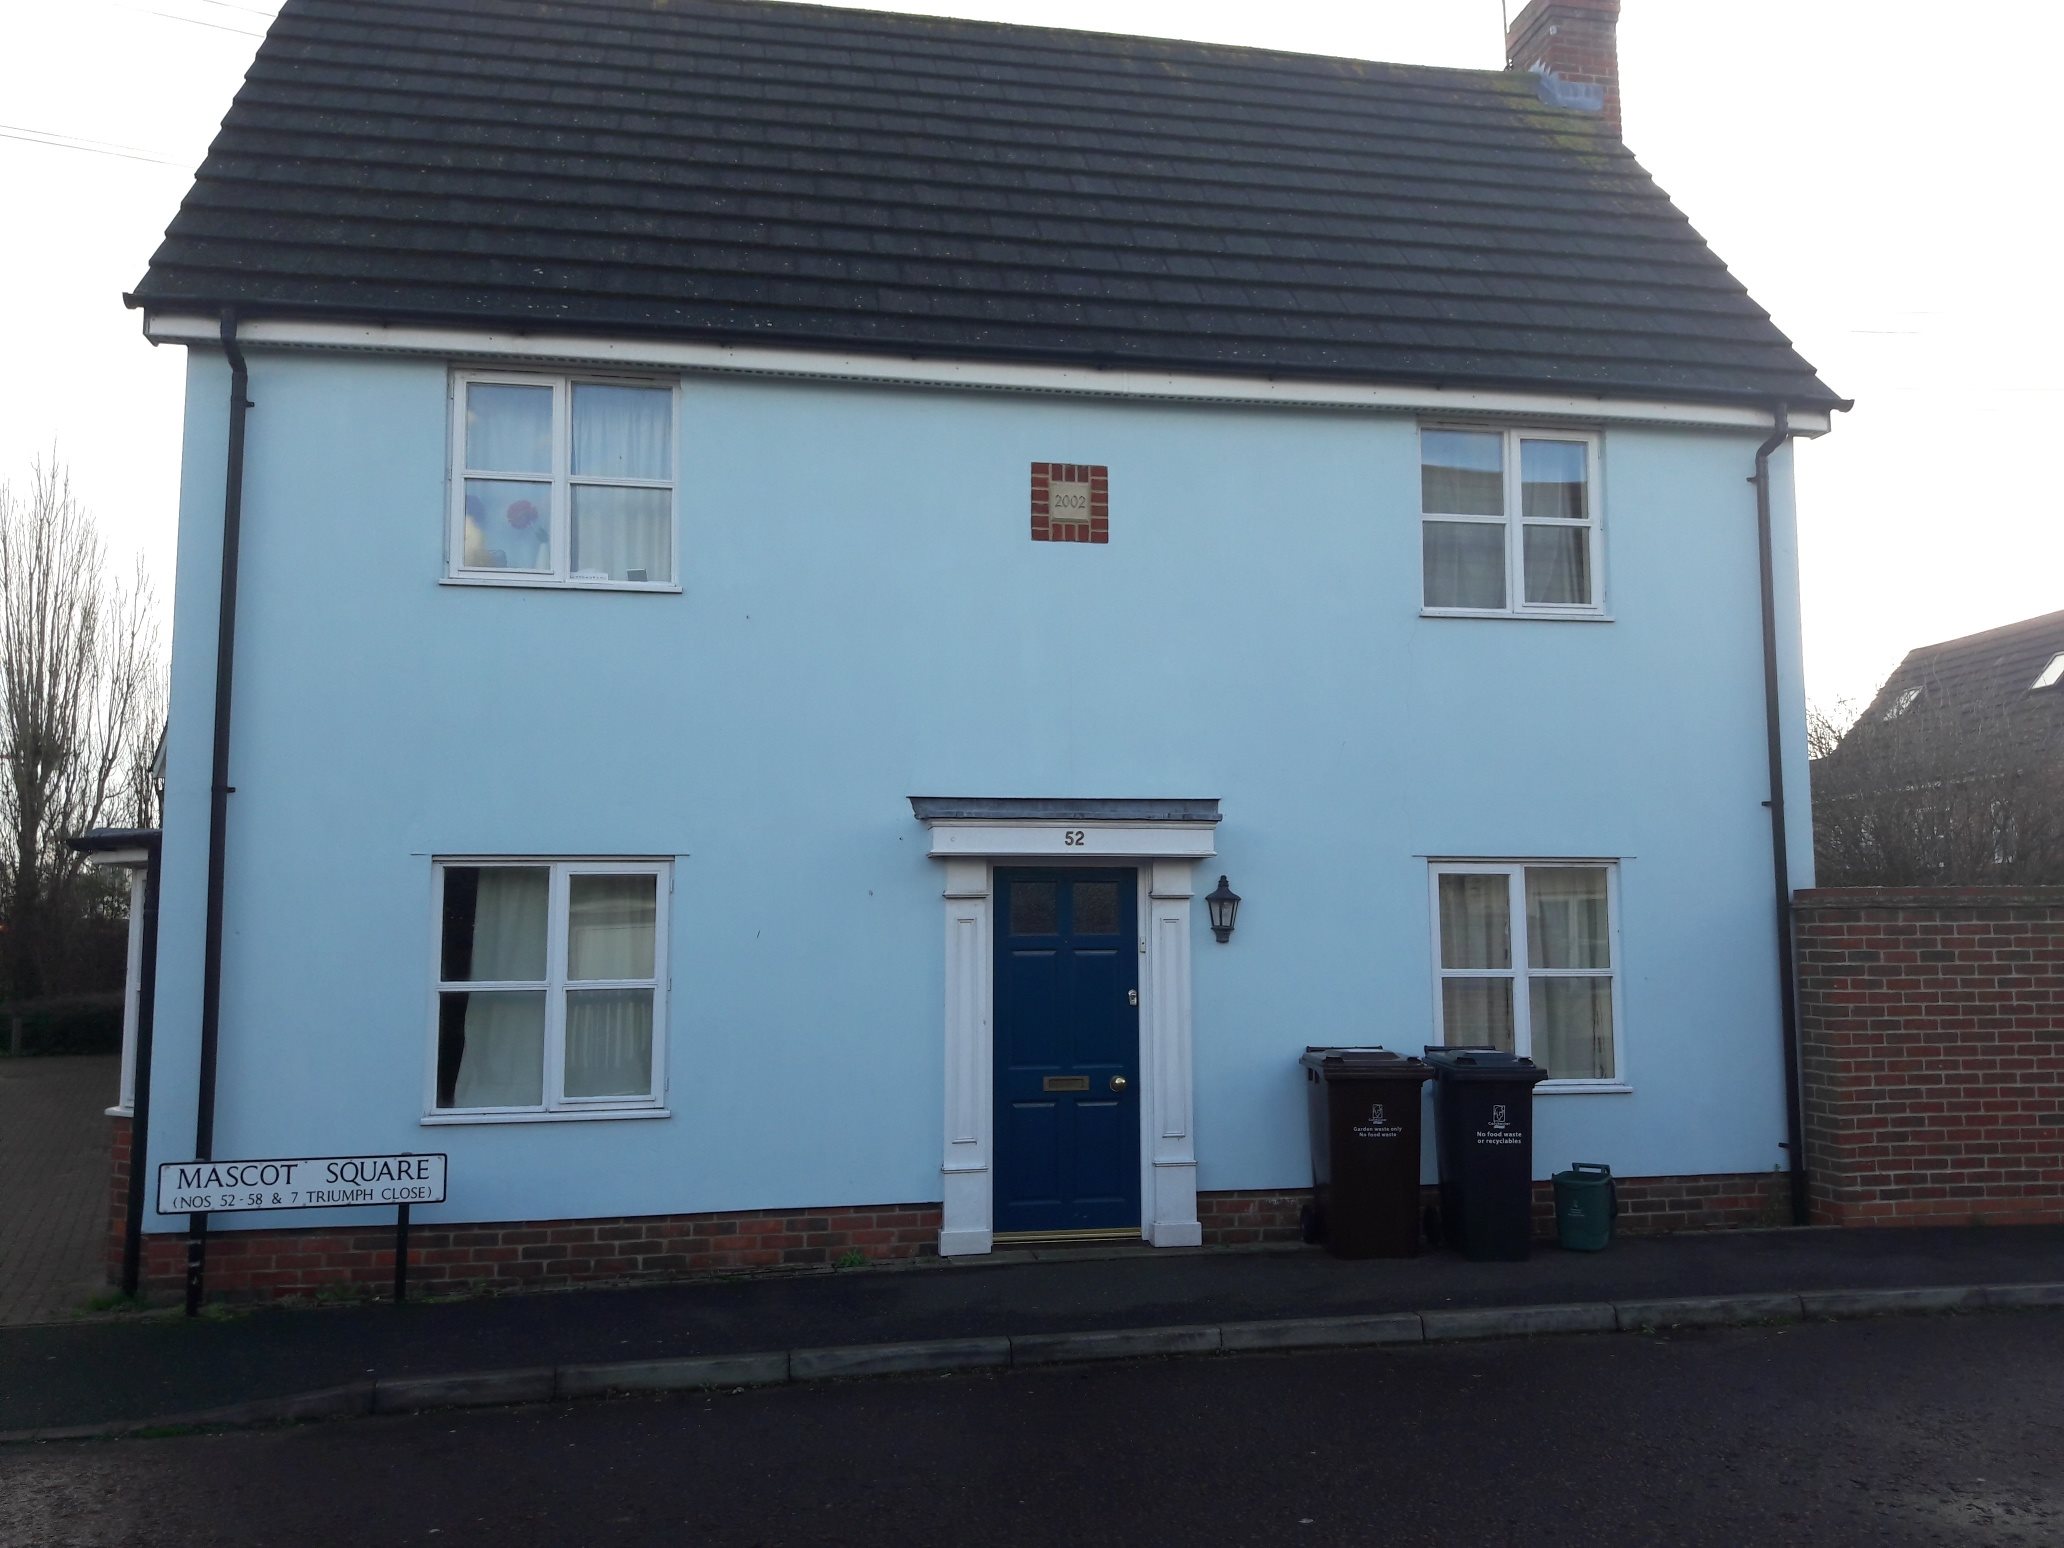 4 bed house to rent in Mascot Square, Colchester - Property Image 1